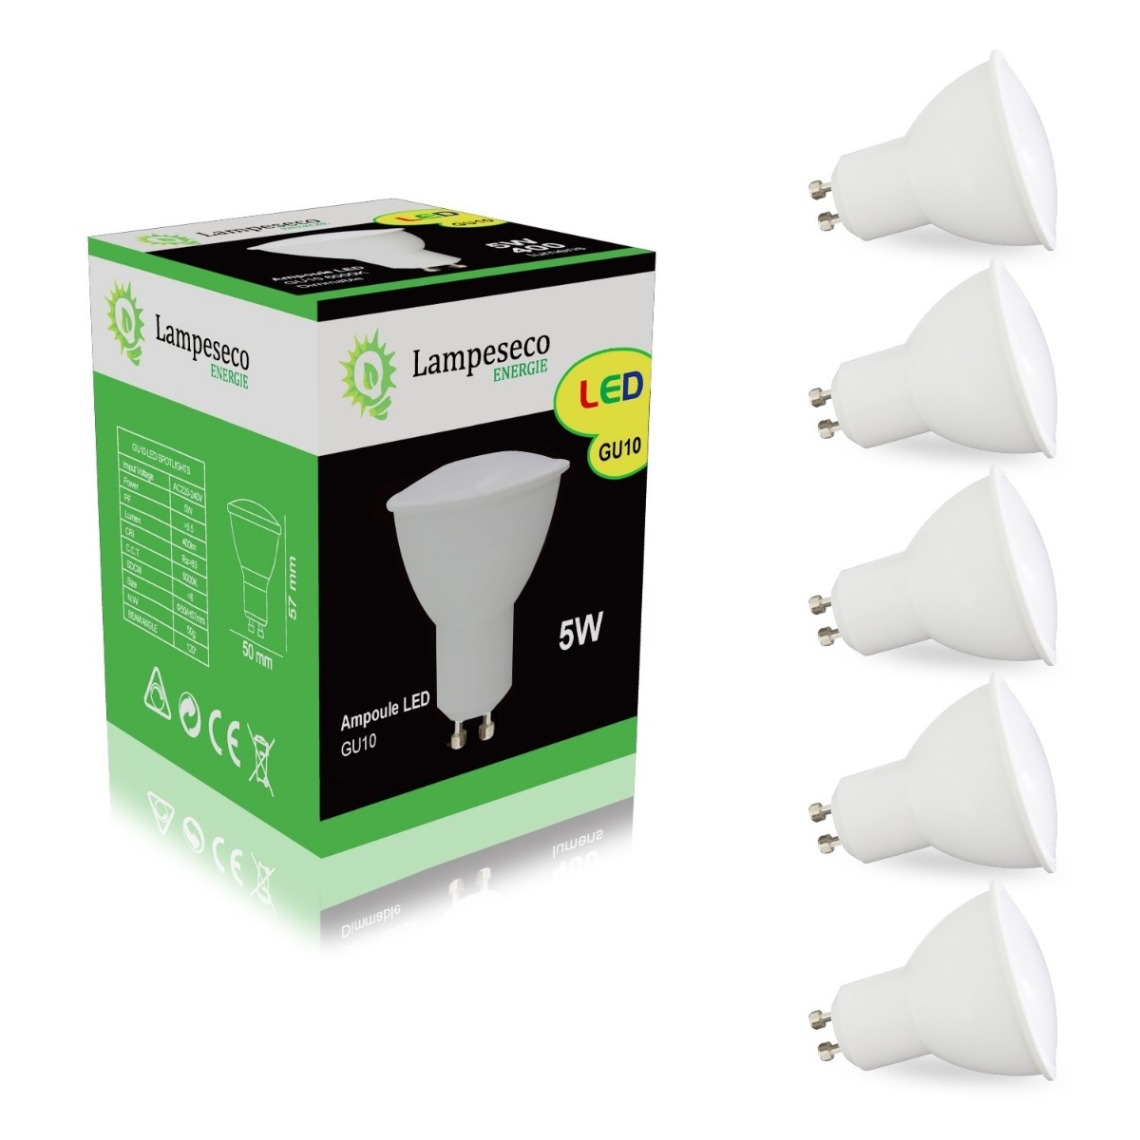 Lampesecoenergie - Pack de 5 Ampoules Led GU10 5W Blanc Froid 120° - Ampoules LED